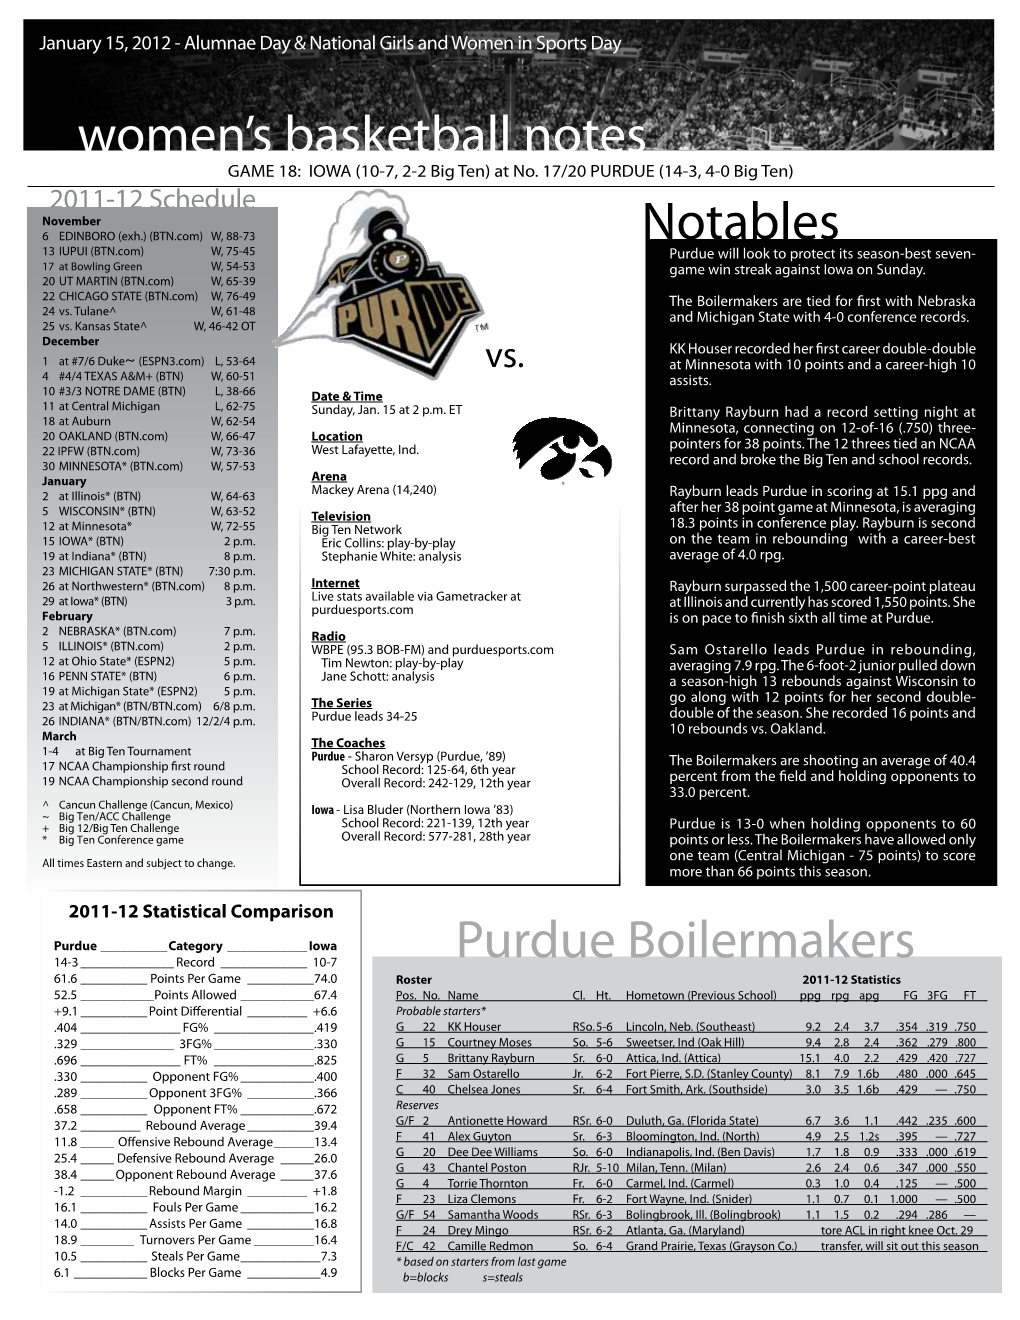 Women's Basketball Notes Purdue Boilermakers Notables